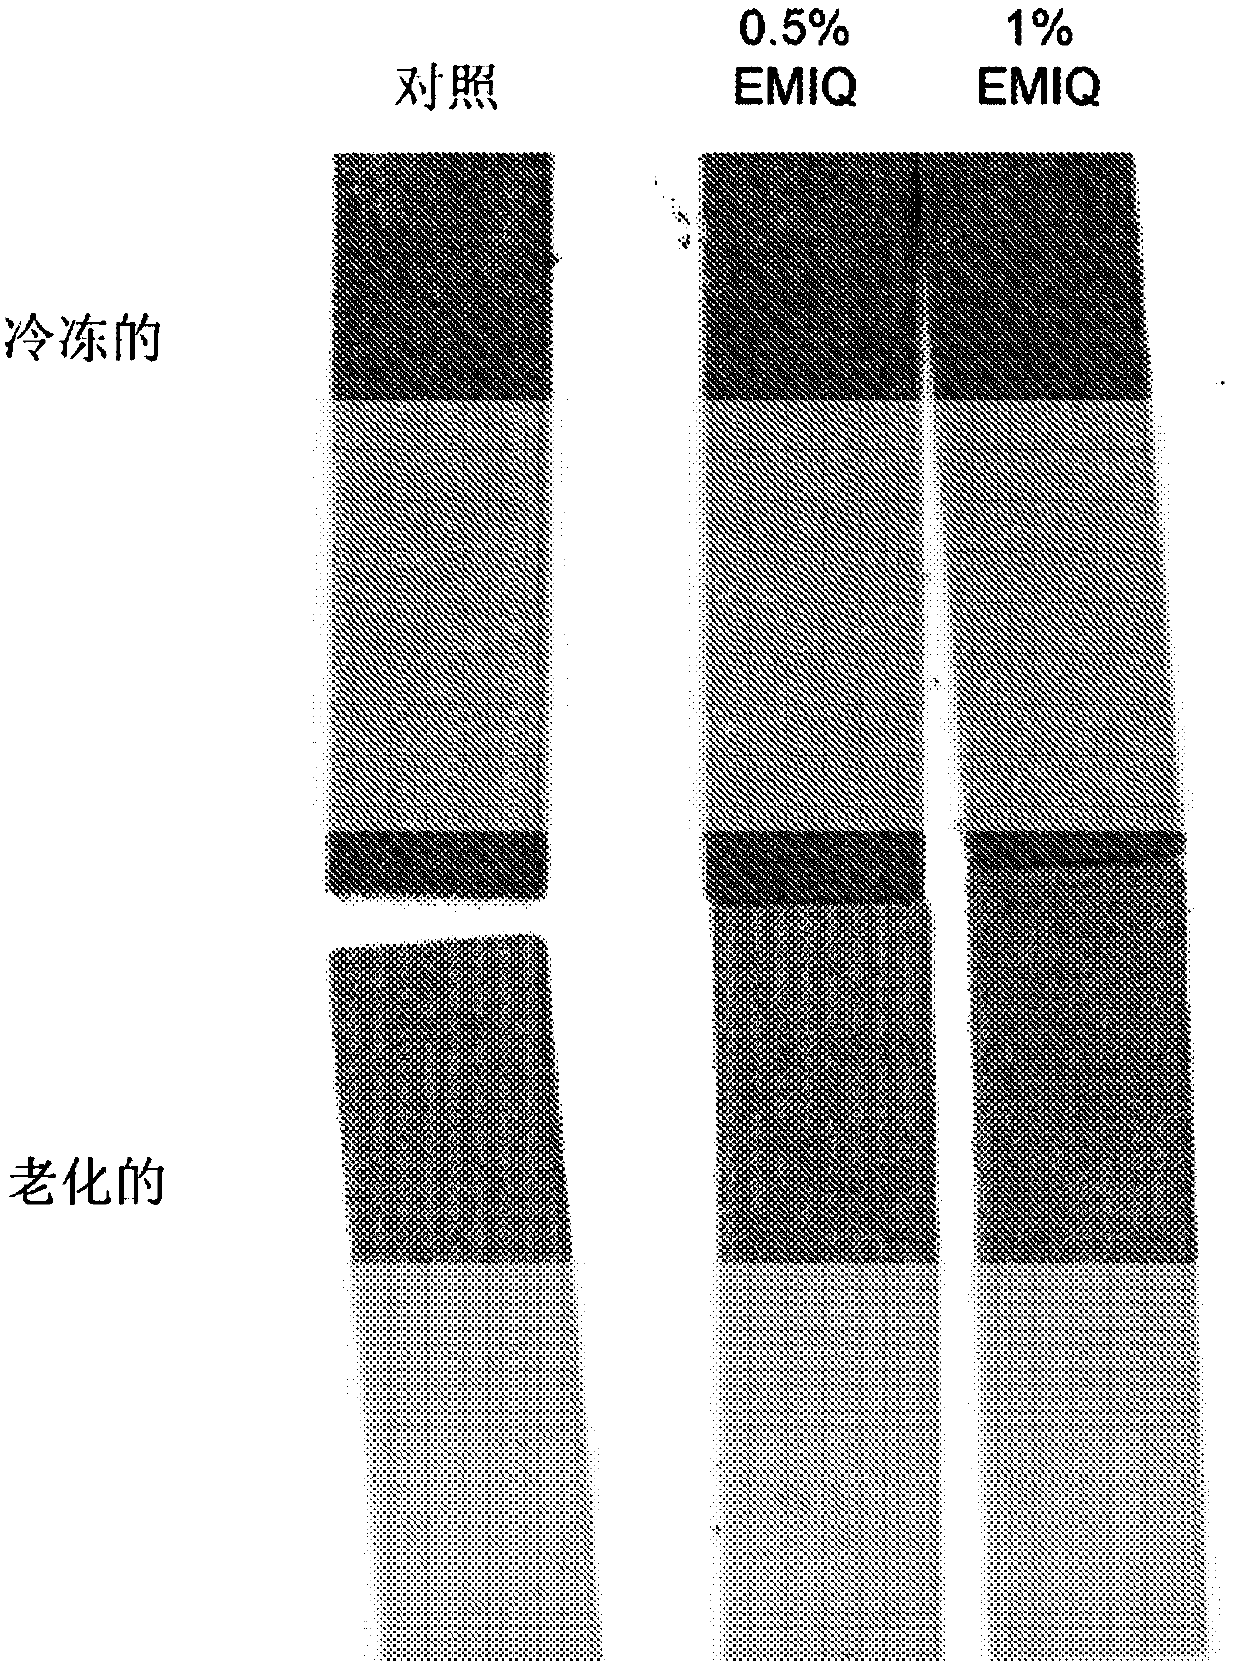 Edible compositions containing stabilized natural colorants